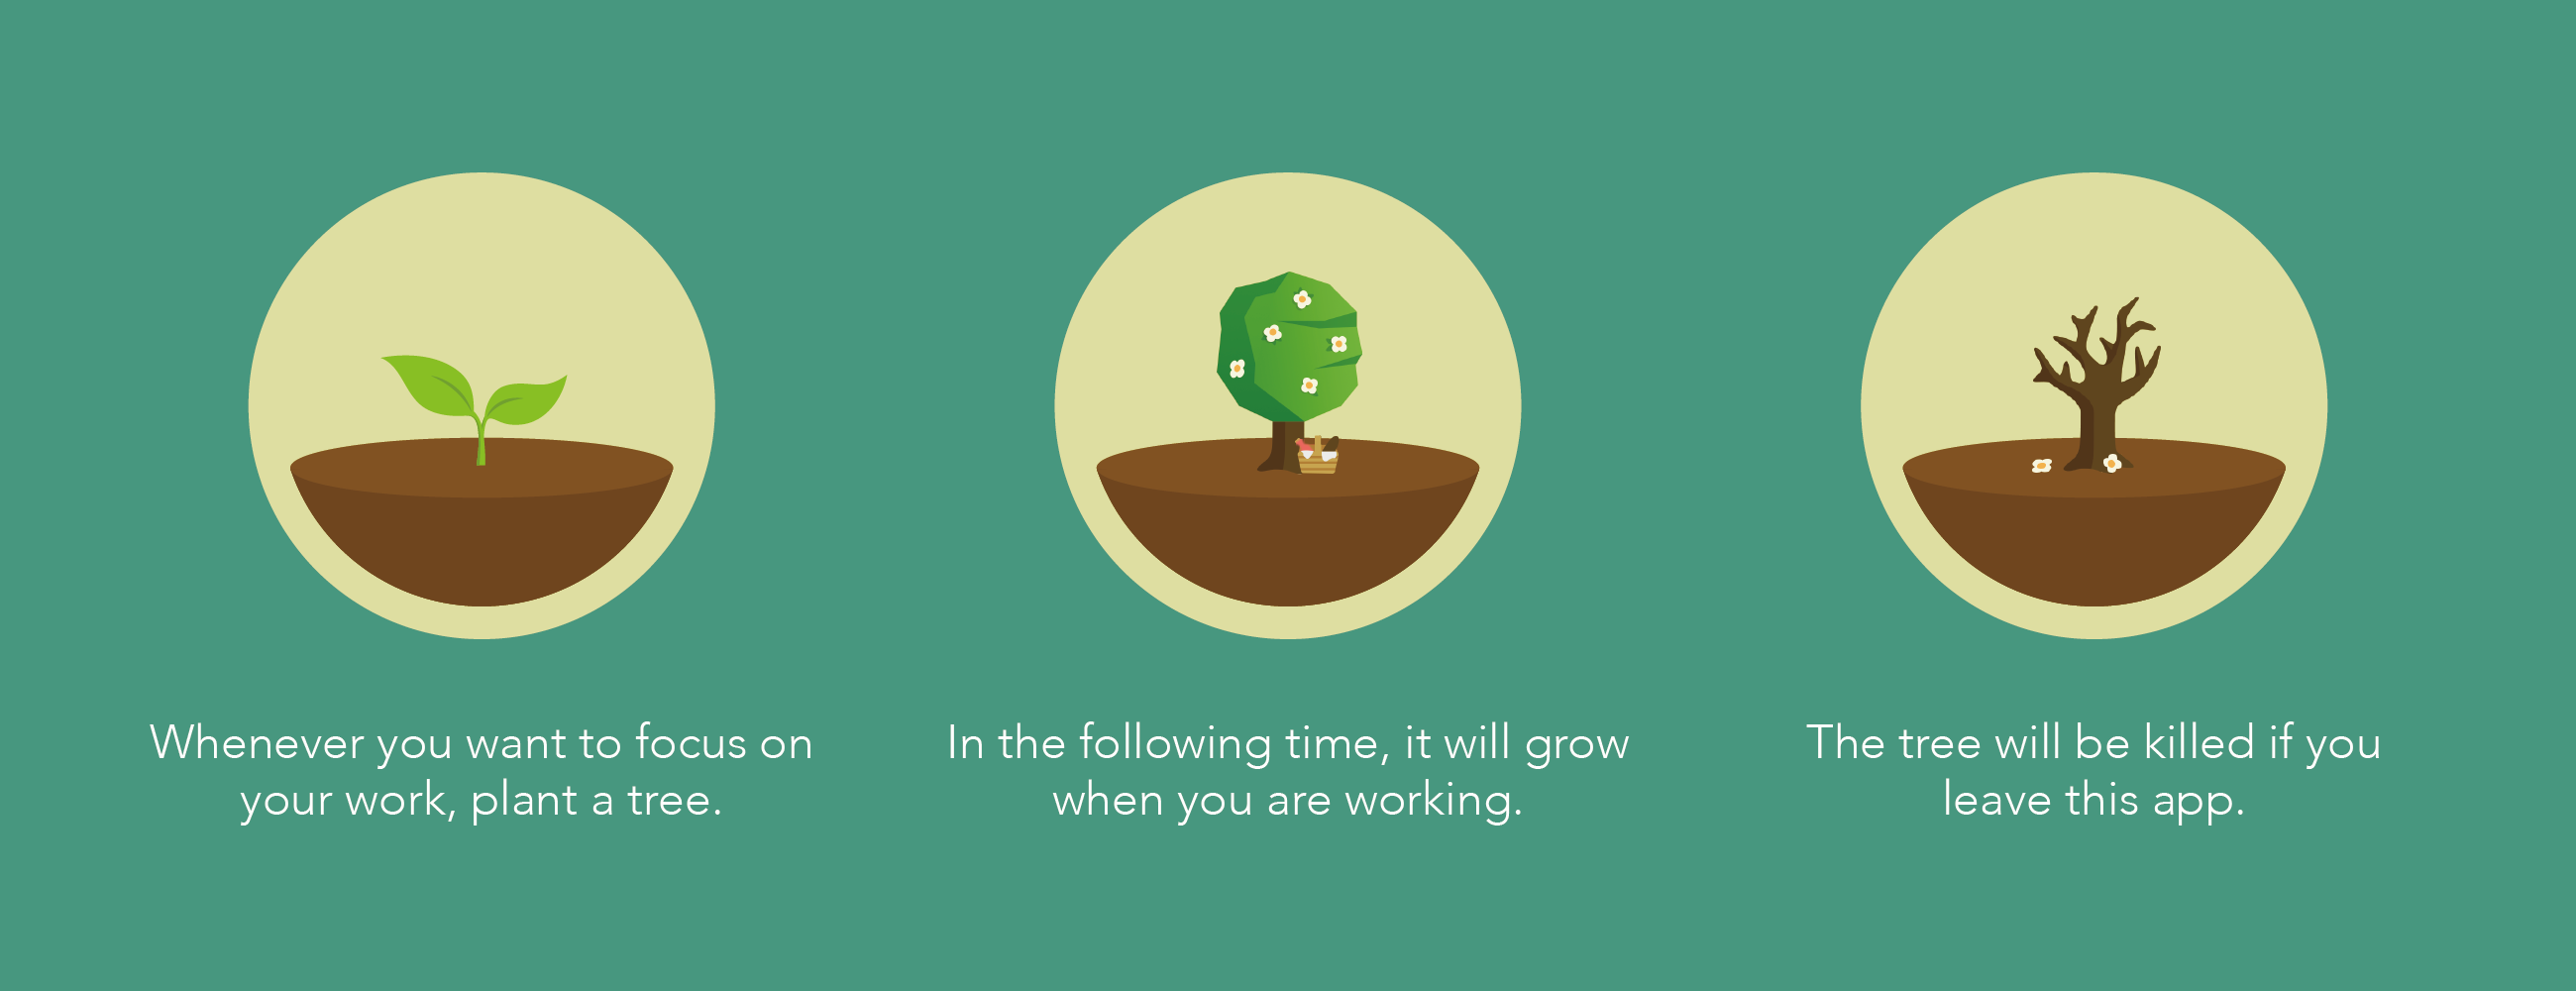 An image explaining how forest works. It says "Whenever you want to focus on your work, plant a tree" and it shows a small sapling. Then it says, "In the following time, it will grow when you are working" next to an image of a tree. And finally, it says "The tree will be killed if you leave this app" below an image of a withered tree.